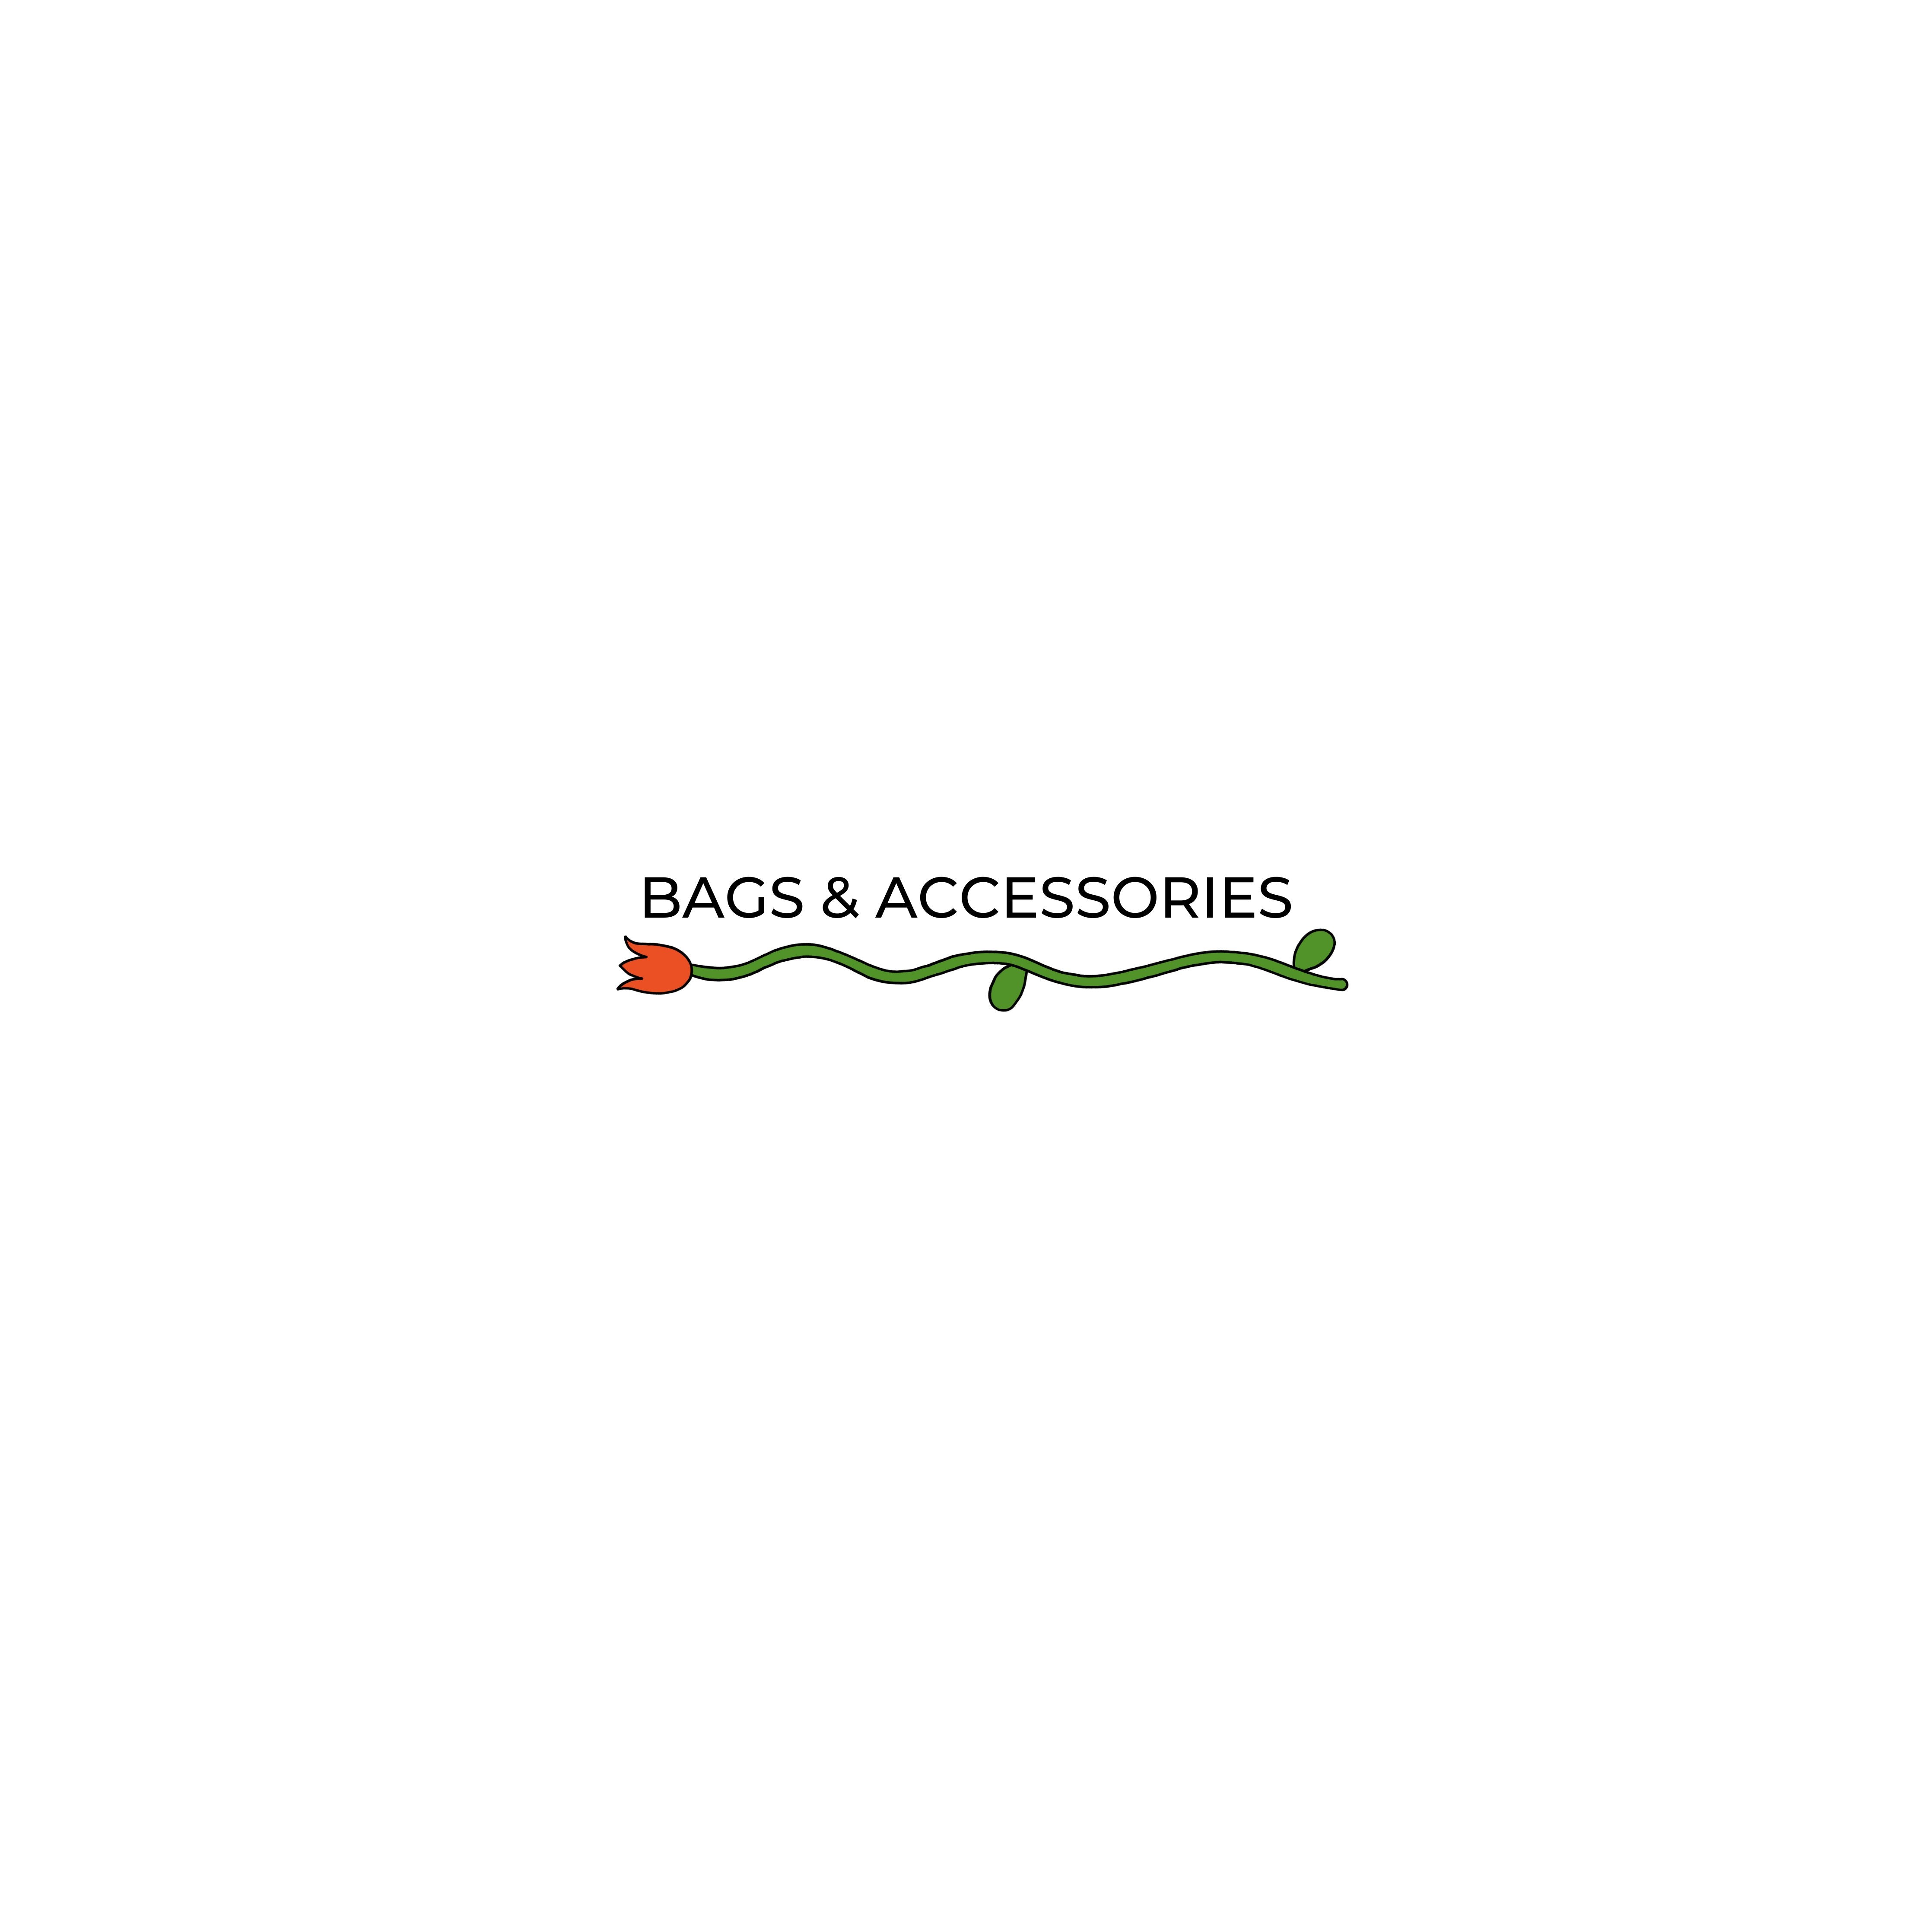 BAGS & ACCESSORIES